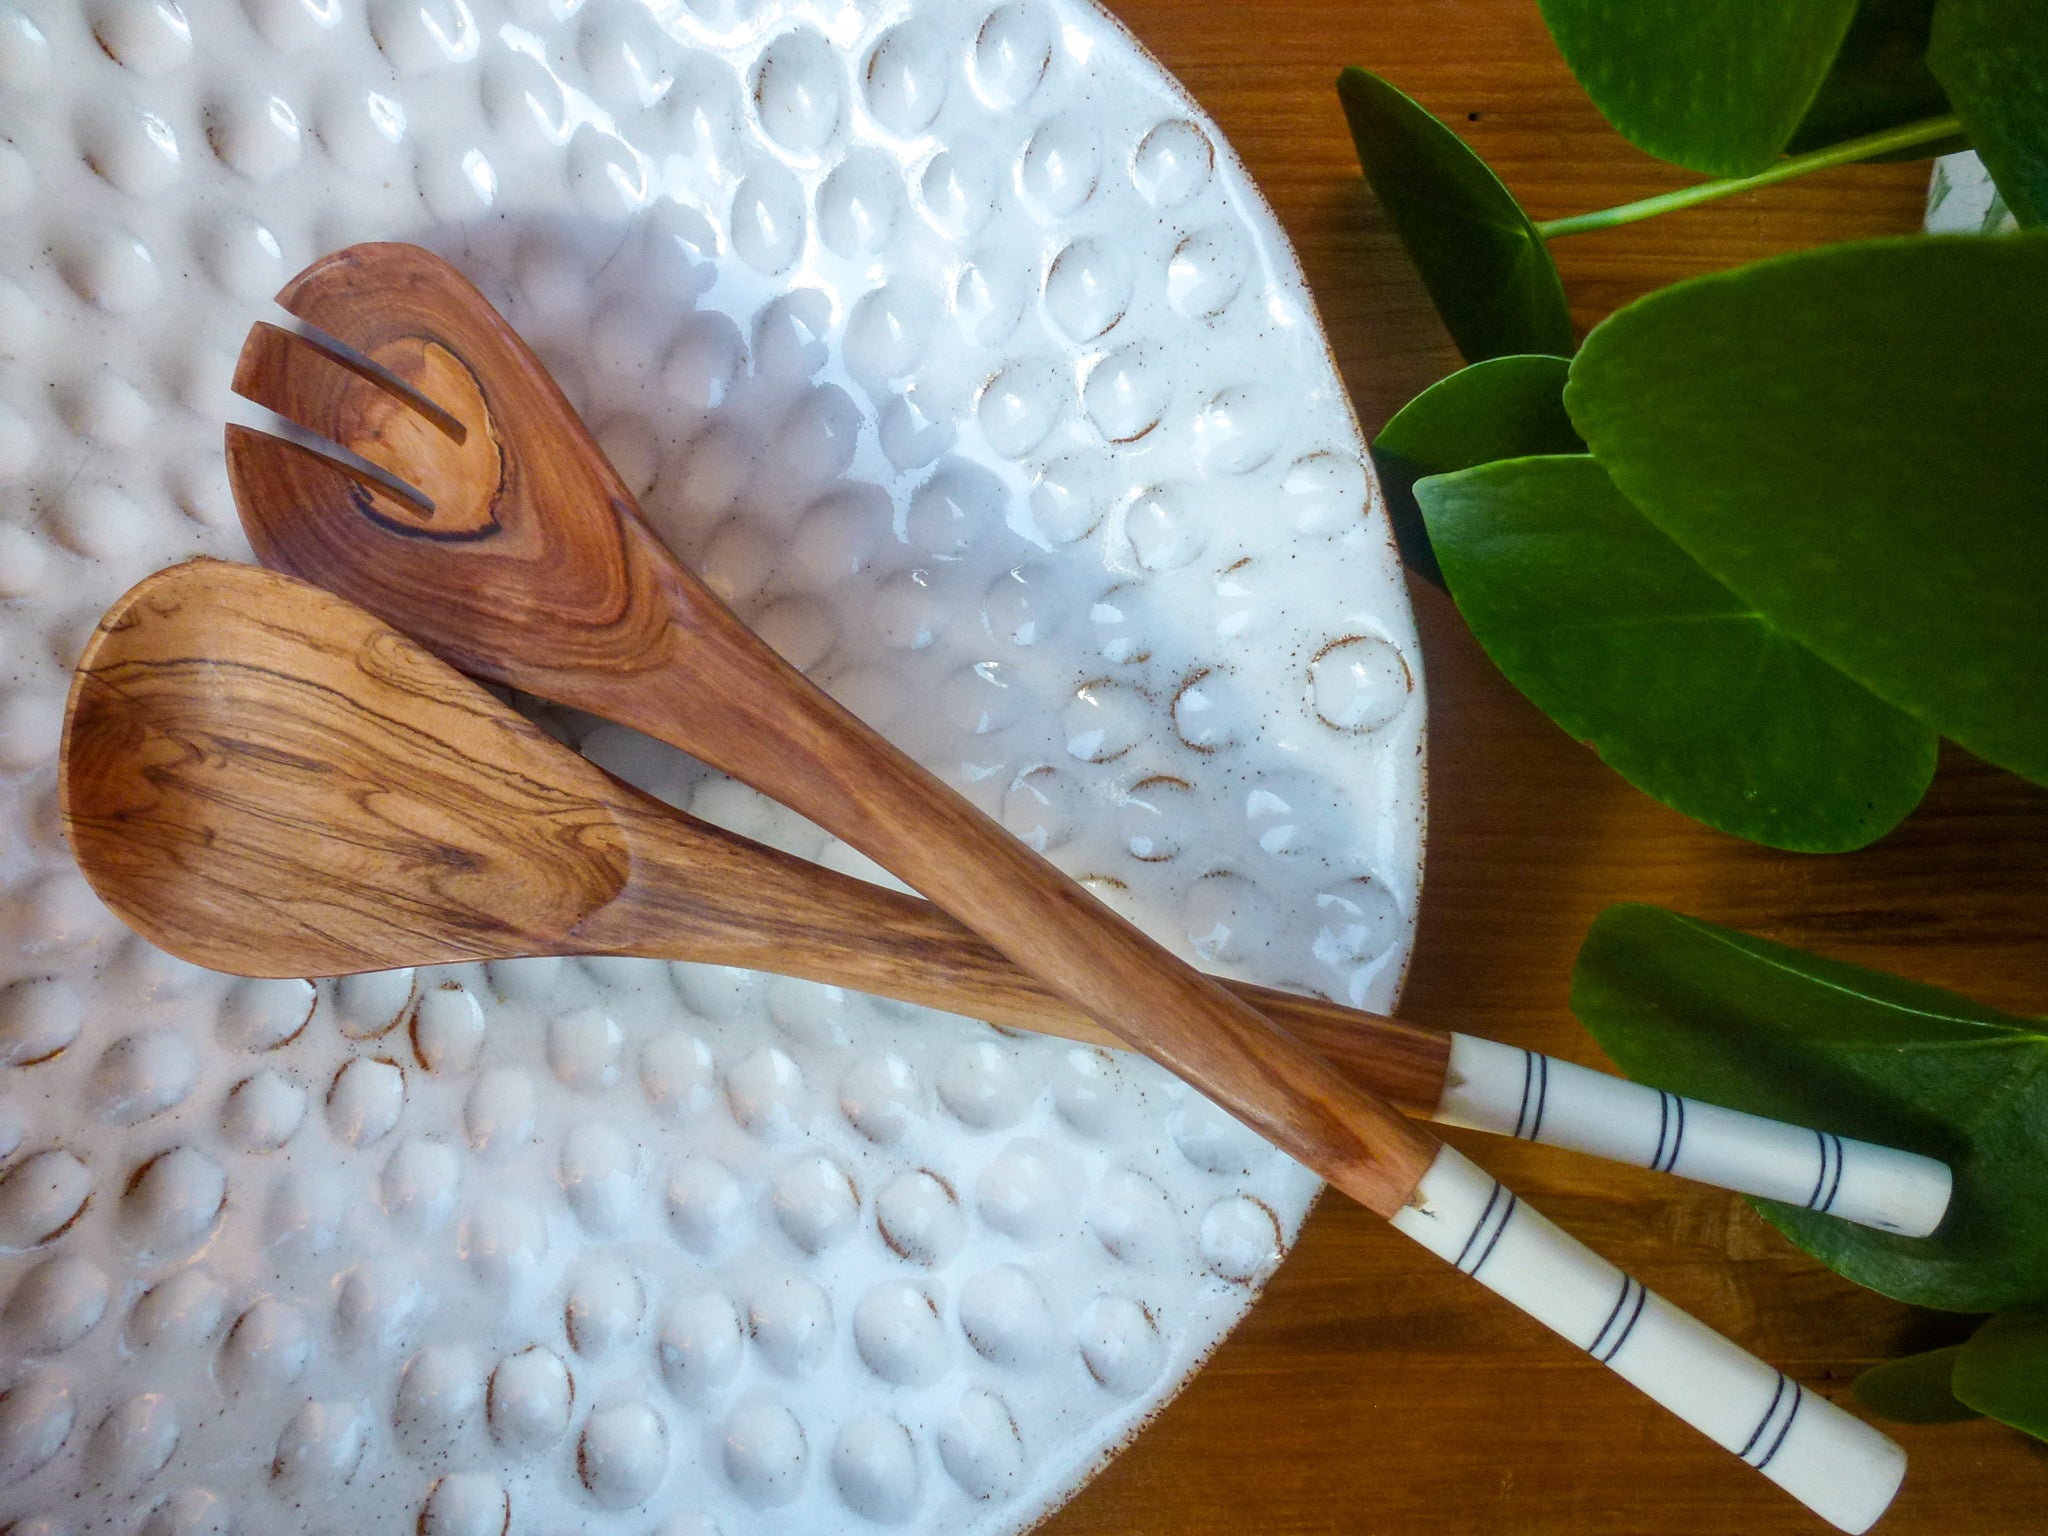 African salad servers made of wood and horn in white fruit bowl